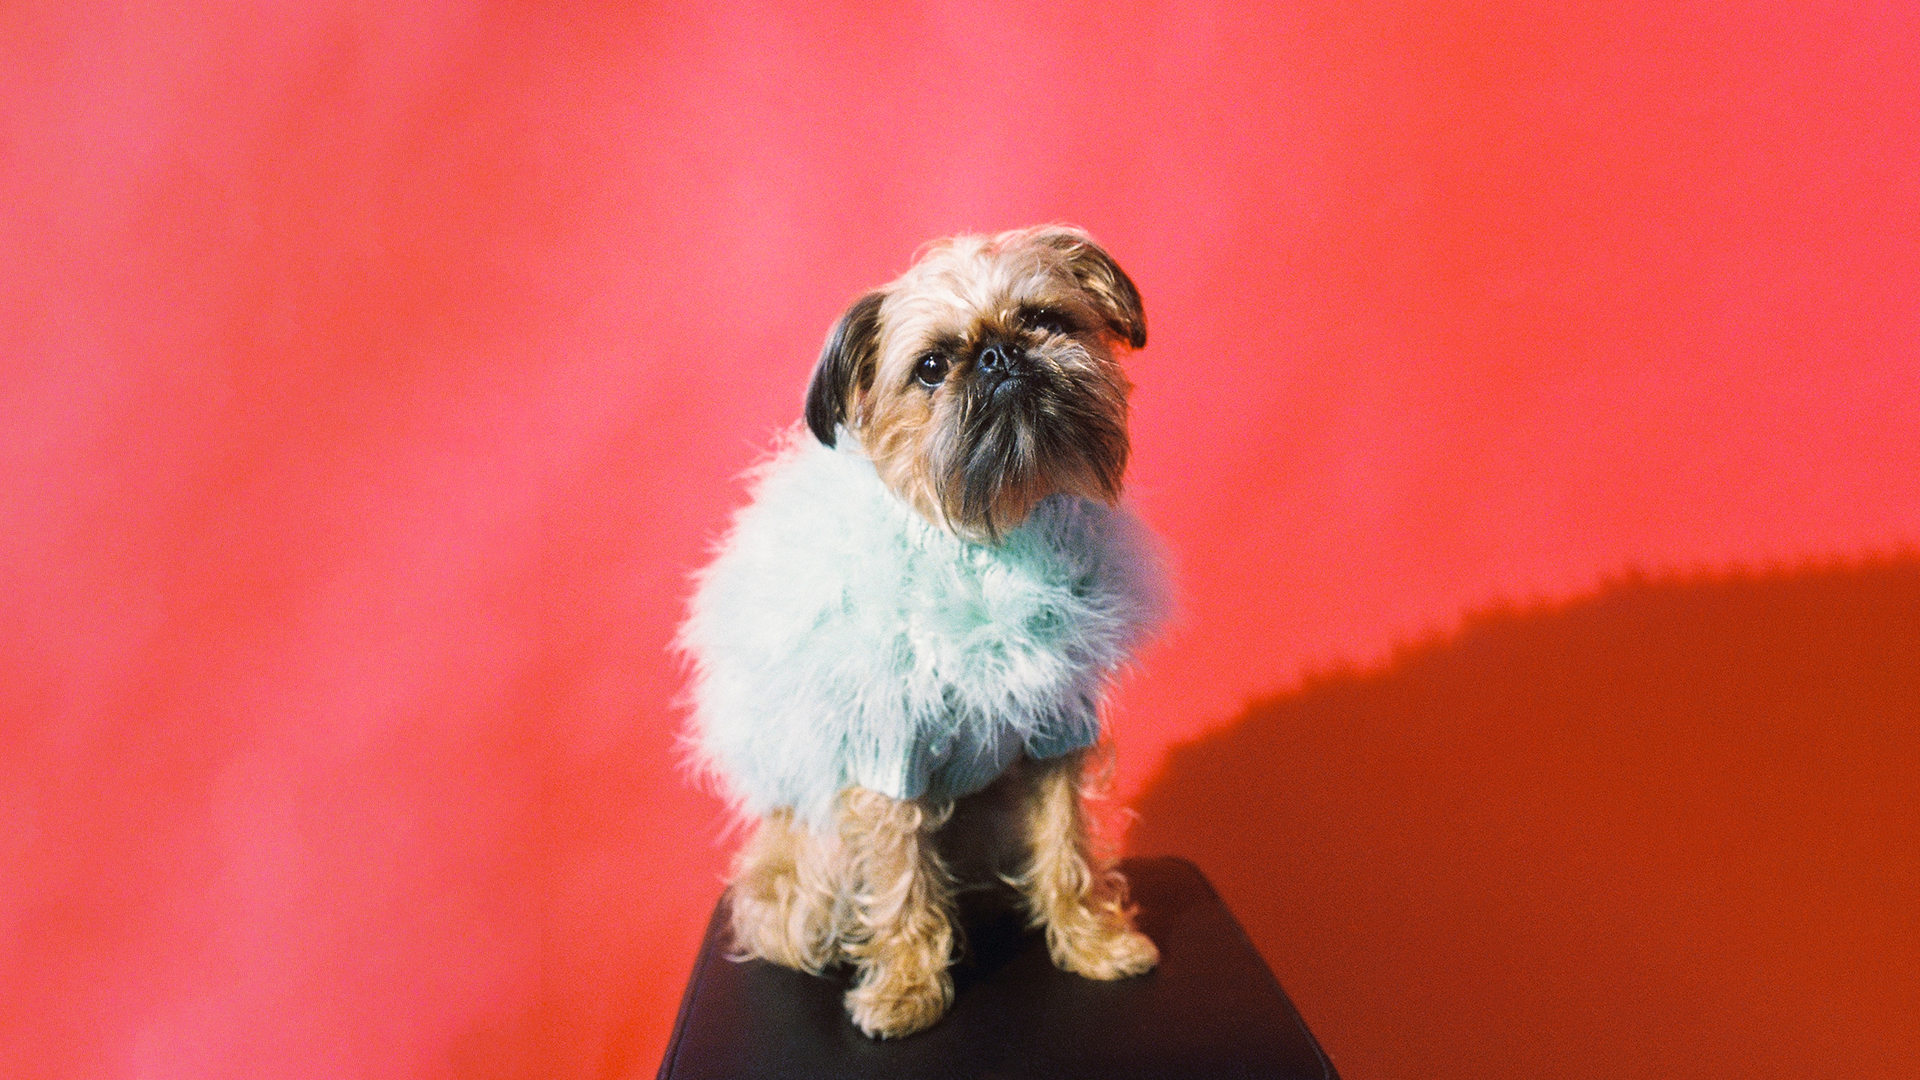 A Griffon puppy wearing a light blue jumper in front of a red wall